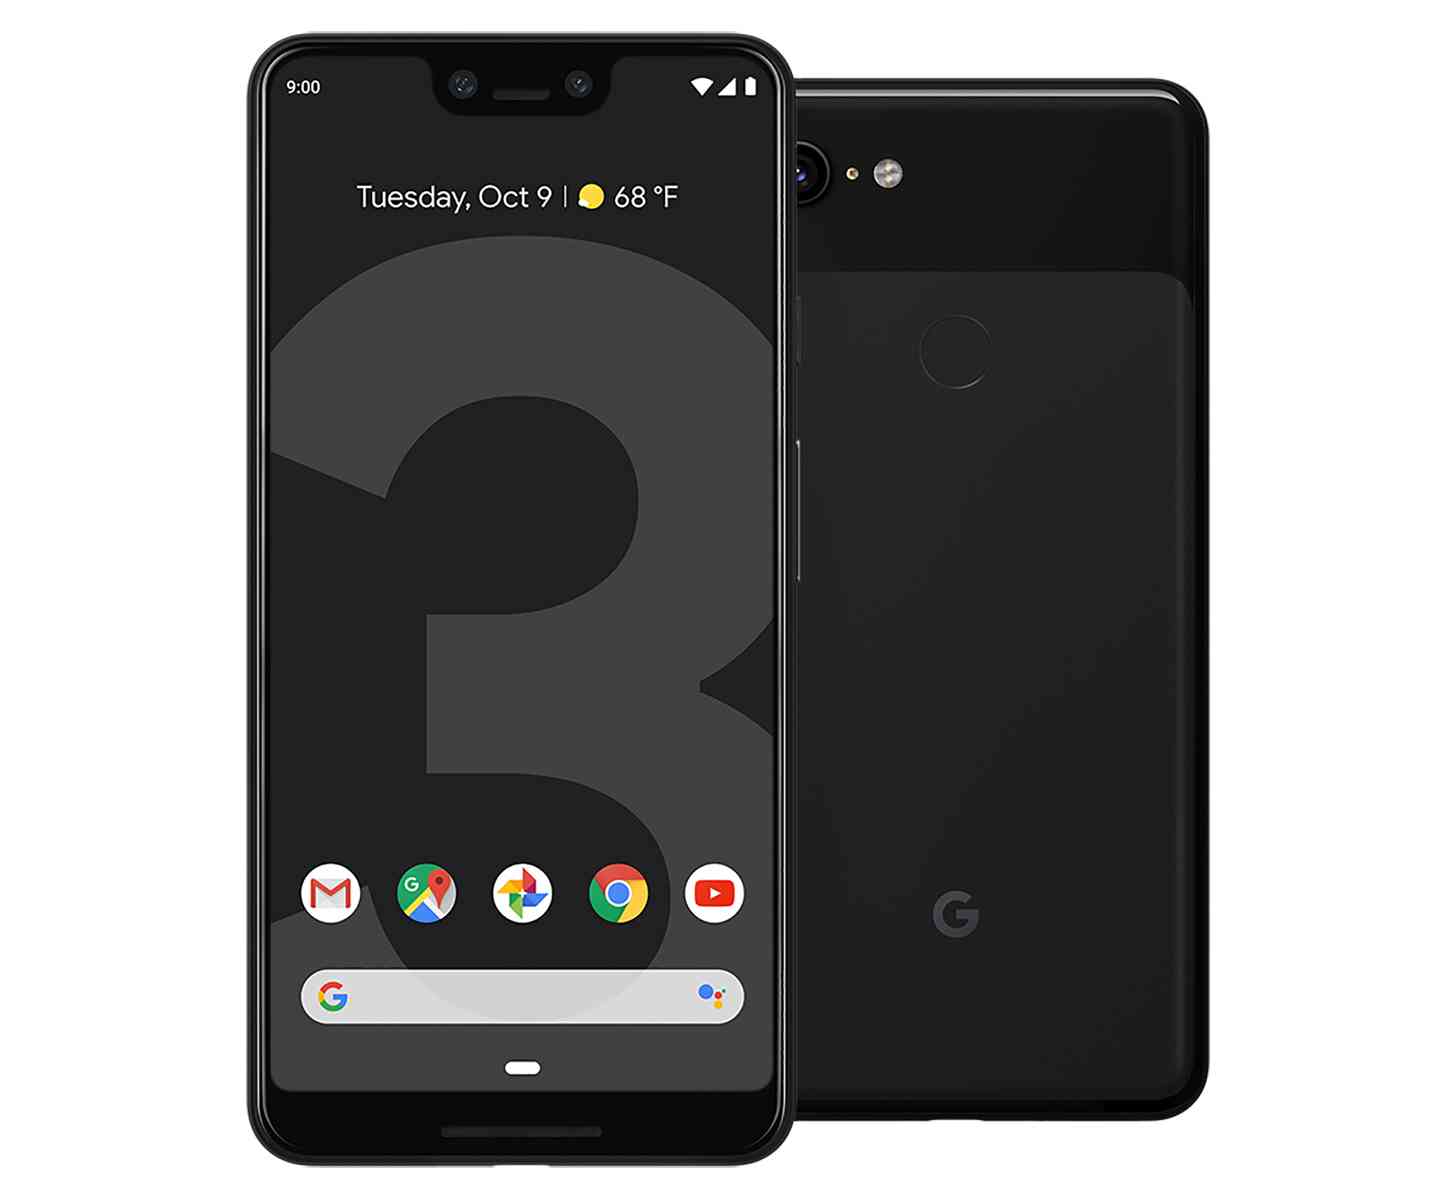 Google Pixel 3 XL 128GB Specification And Price in ...